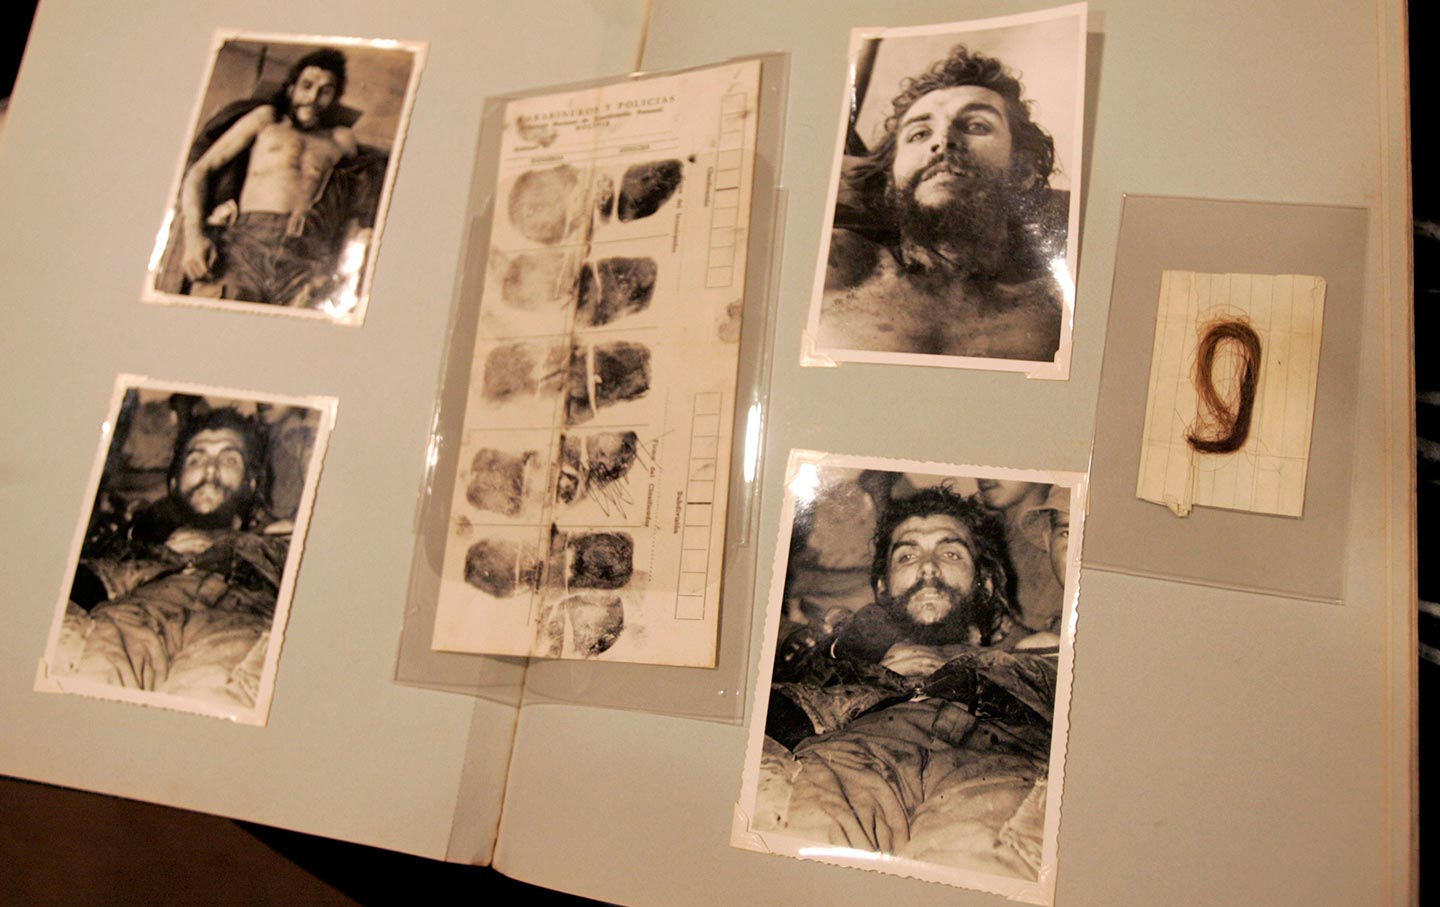 The Death of Che Guevara Declassified